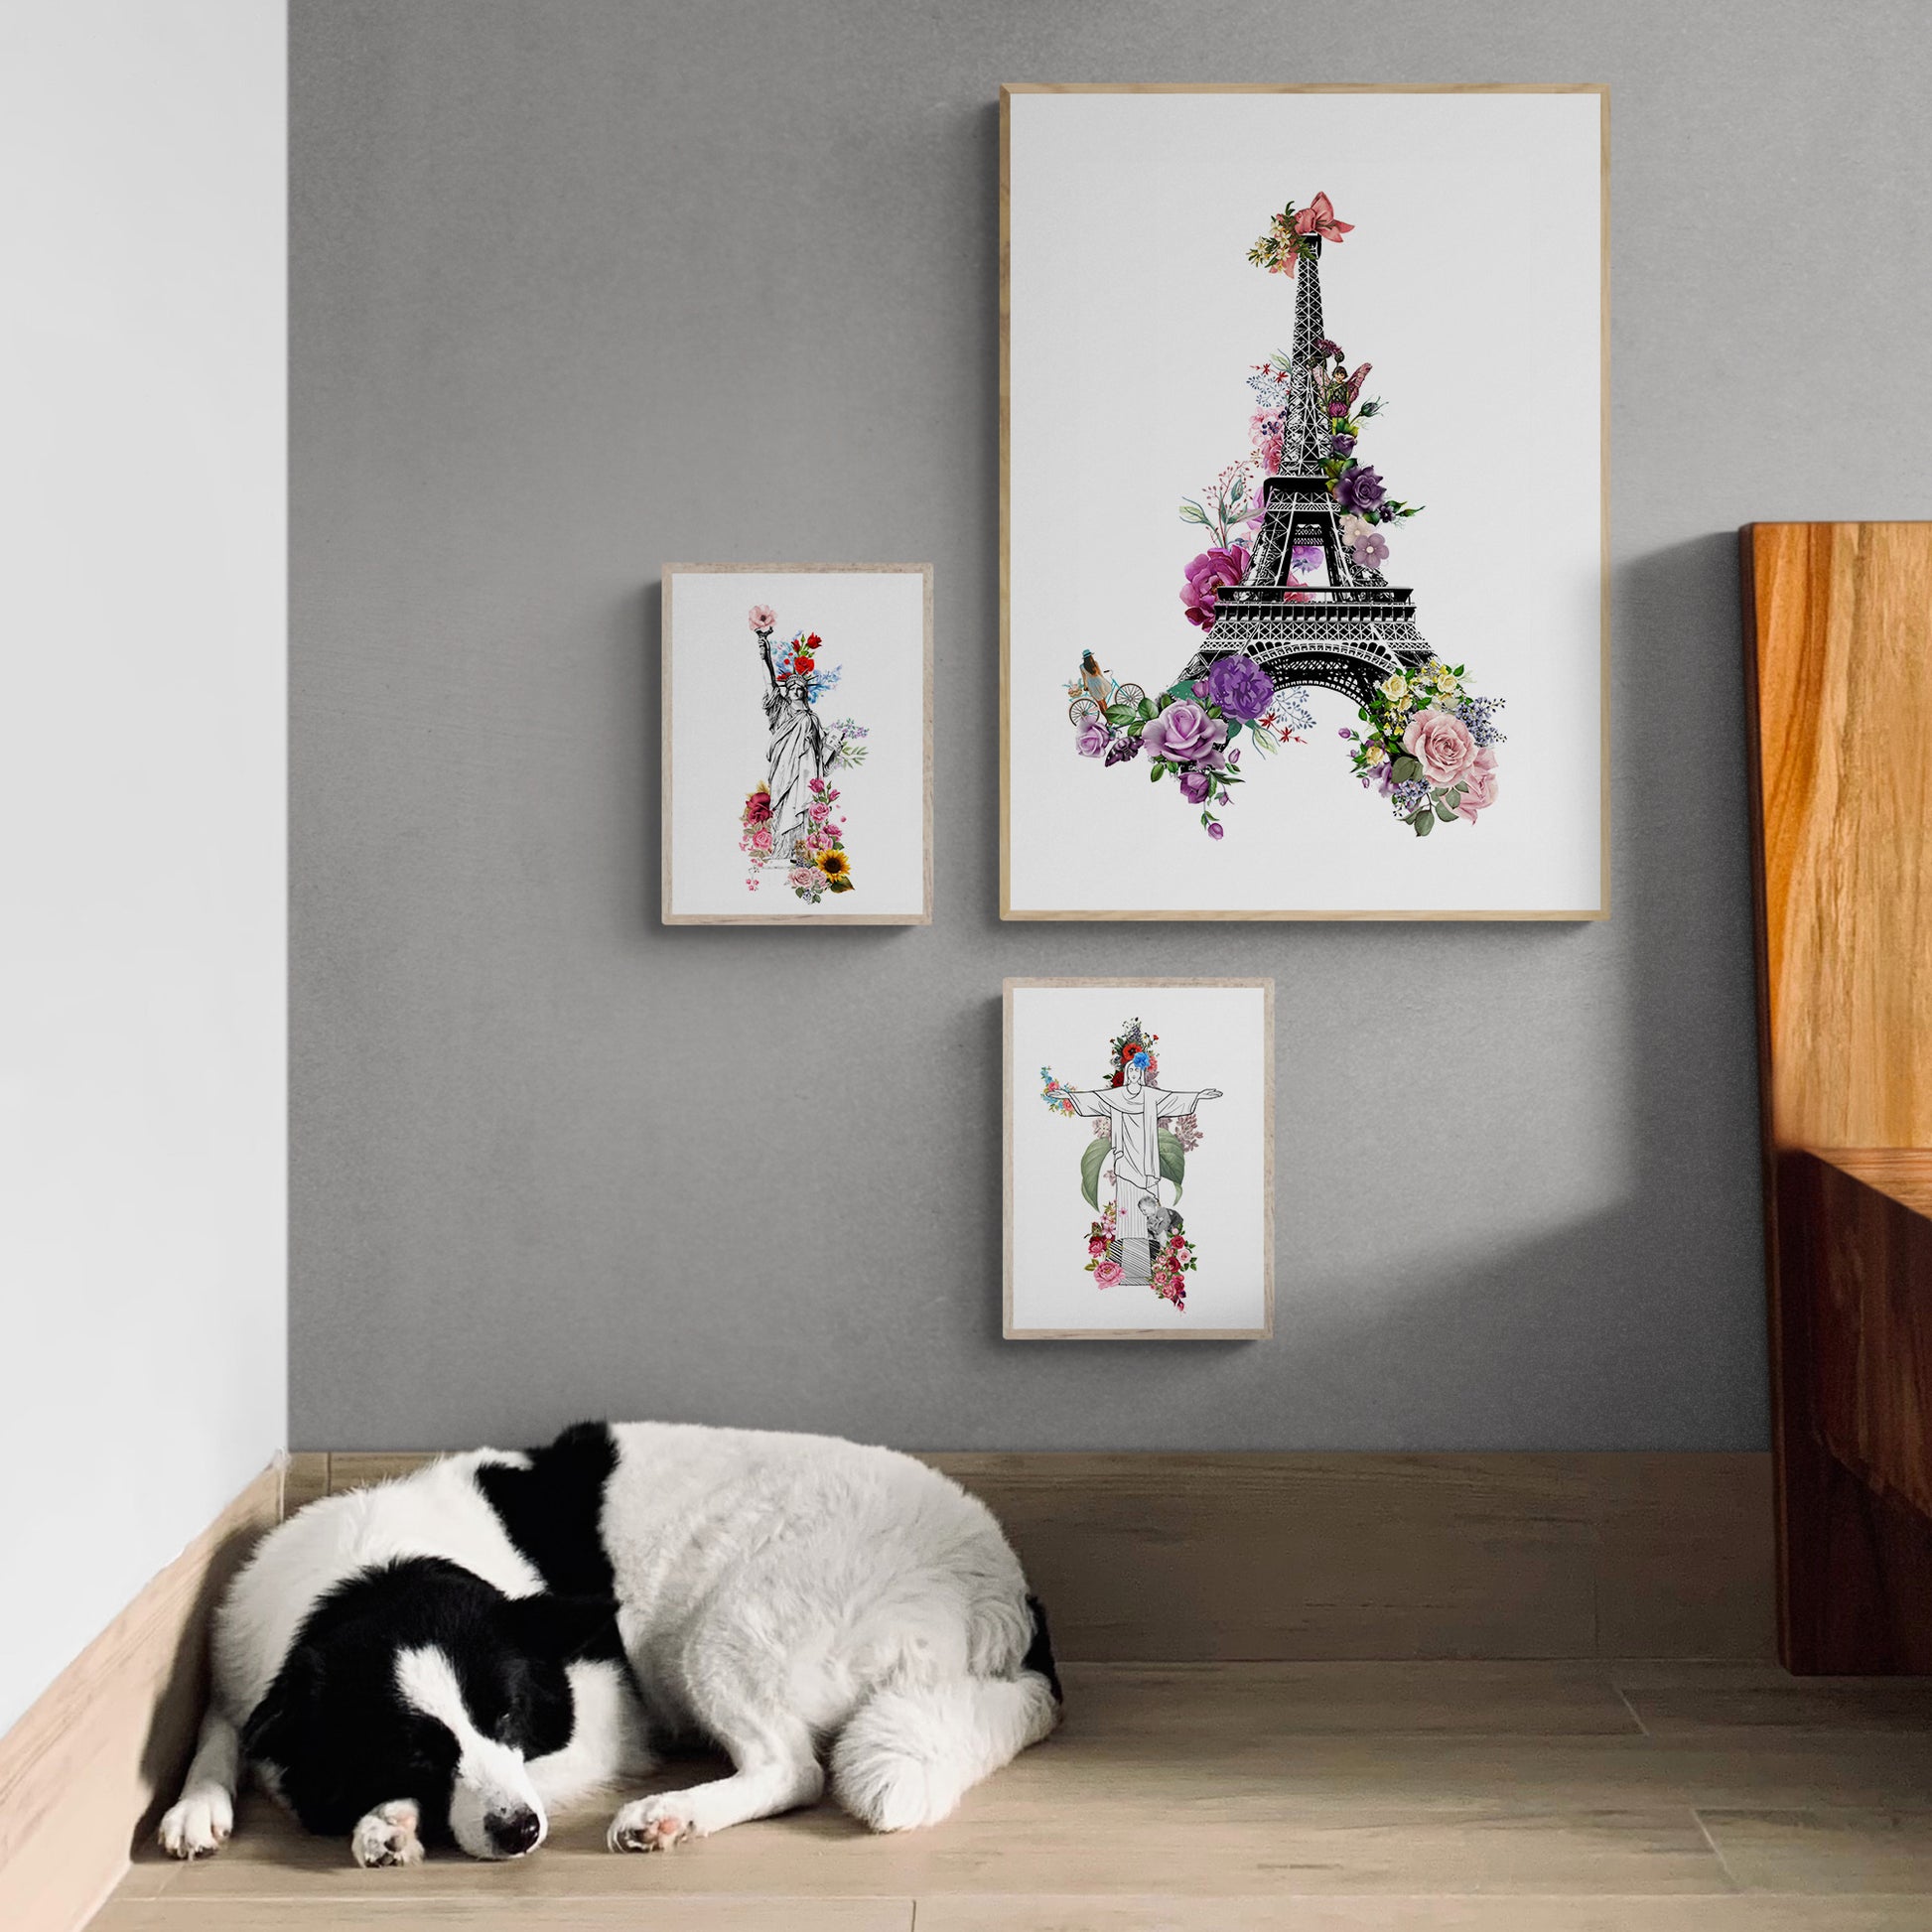  This Eiffel Tower Paris Flowers Poster features precision-detailed human anatomy and the iconic Eiffel Tower of Paris. Printed on matte paper, it's perfect for adding a touch of culture to any wall. A great addition to any home or office!